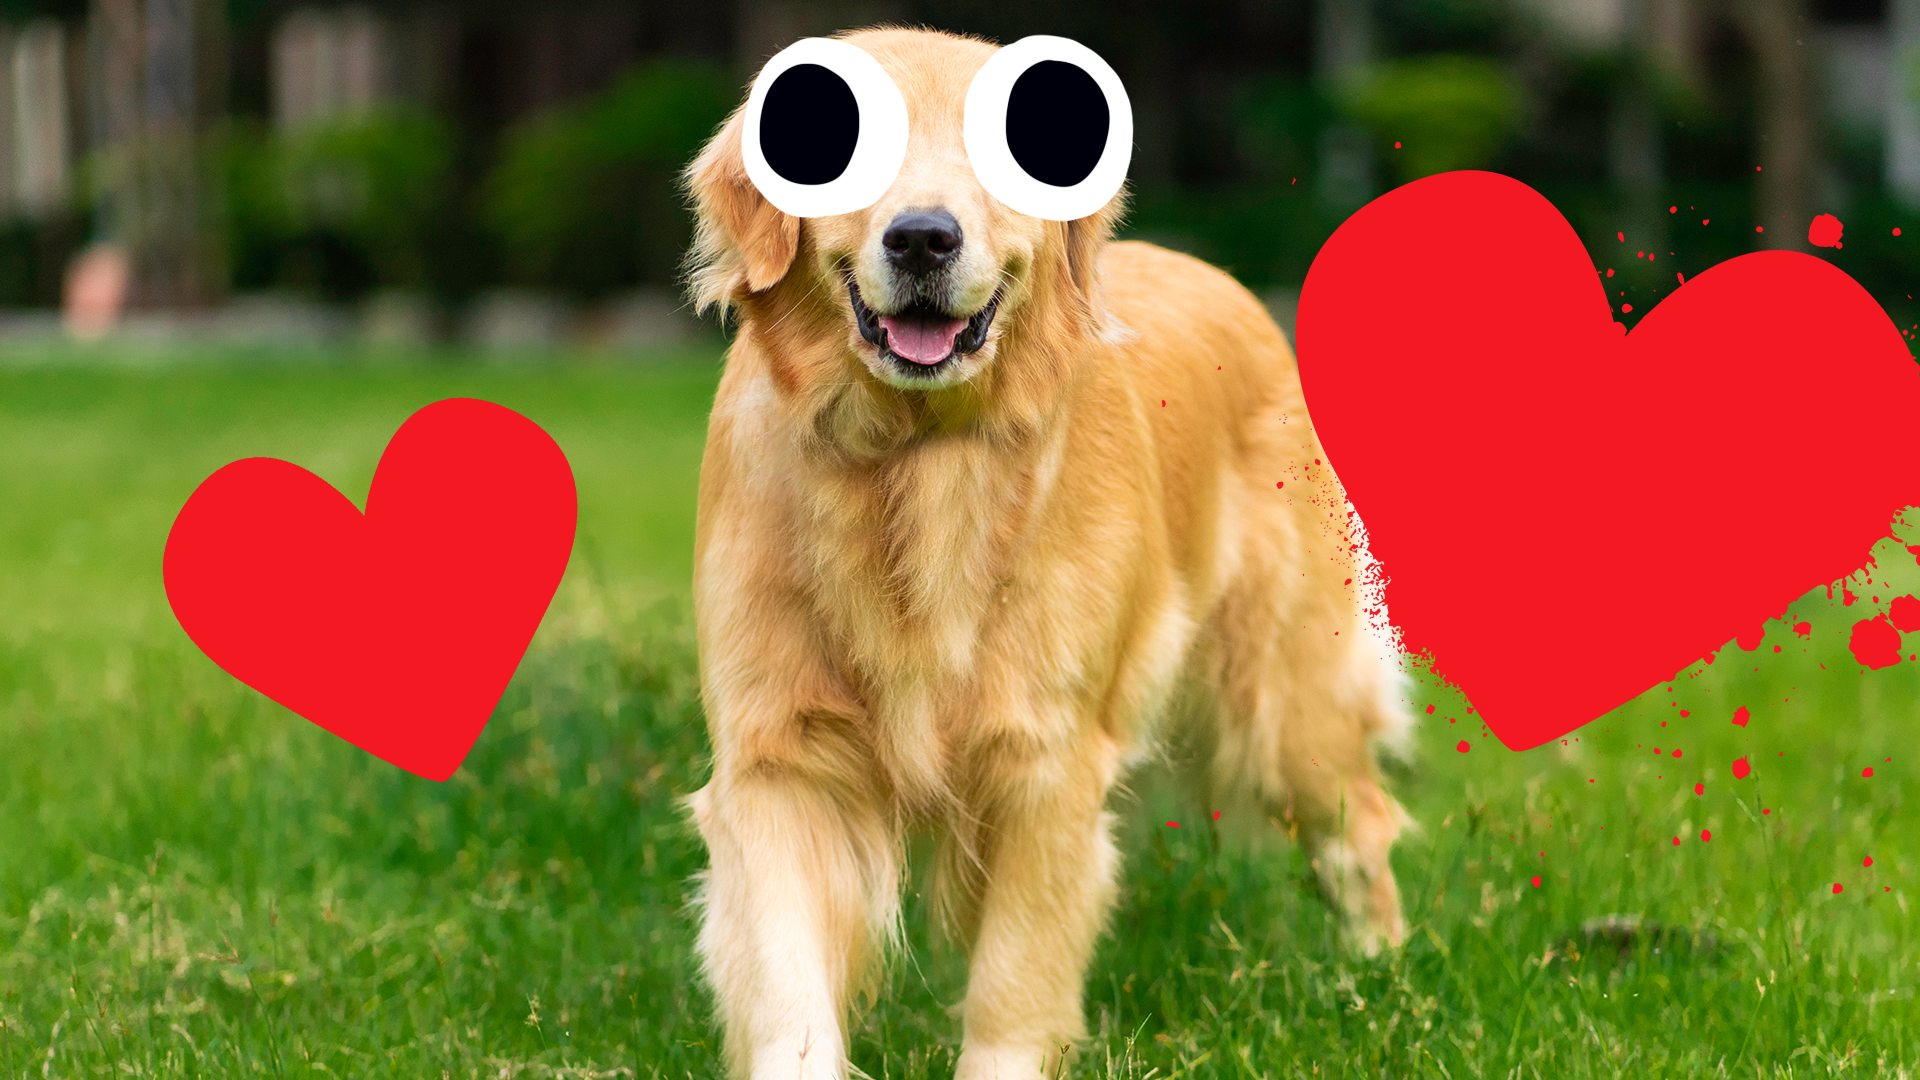 Dog with hearts around it